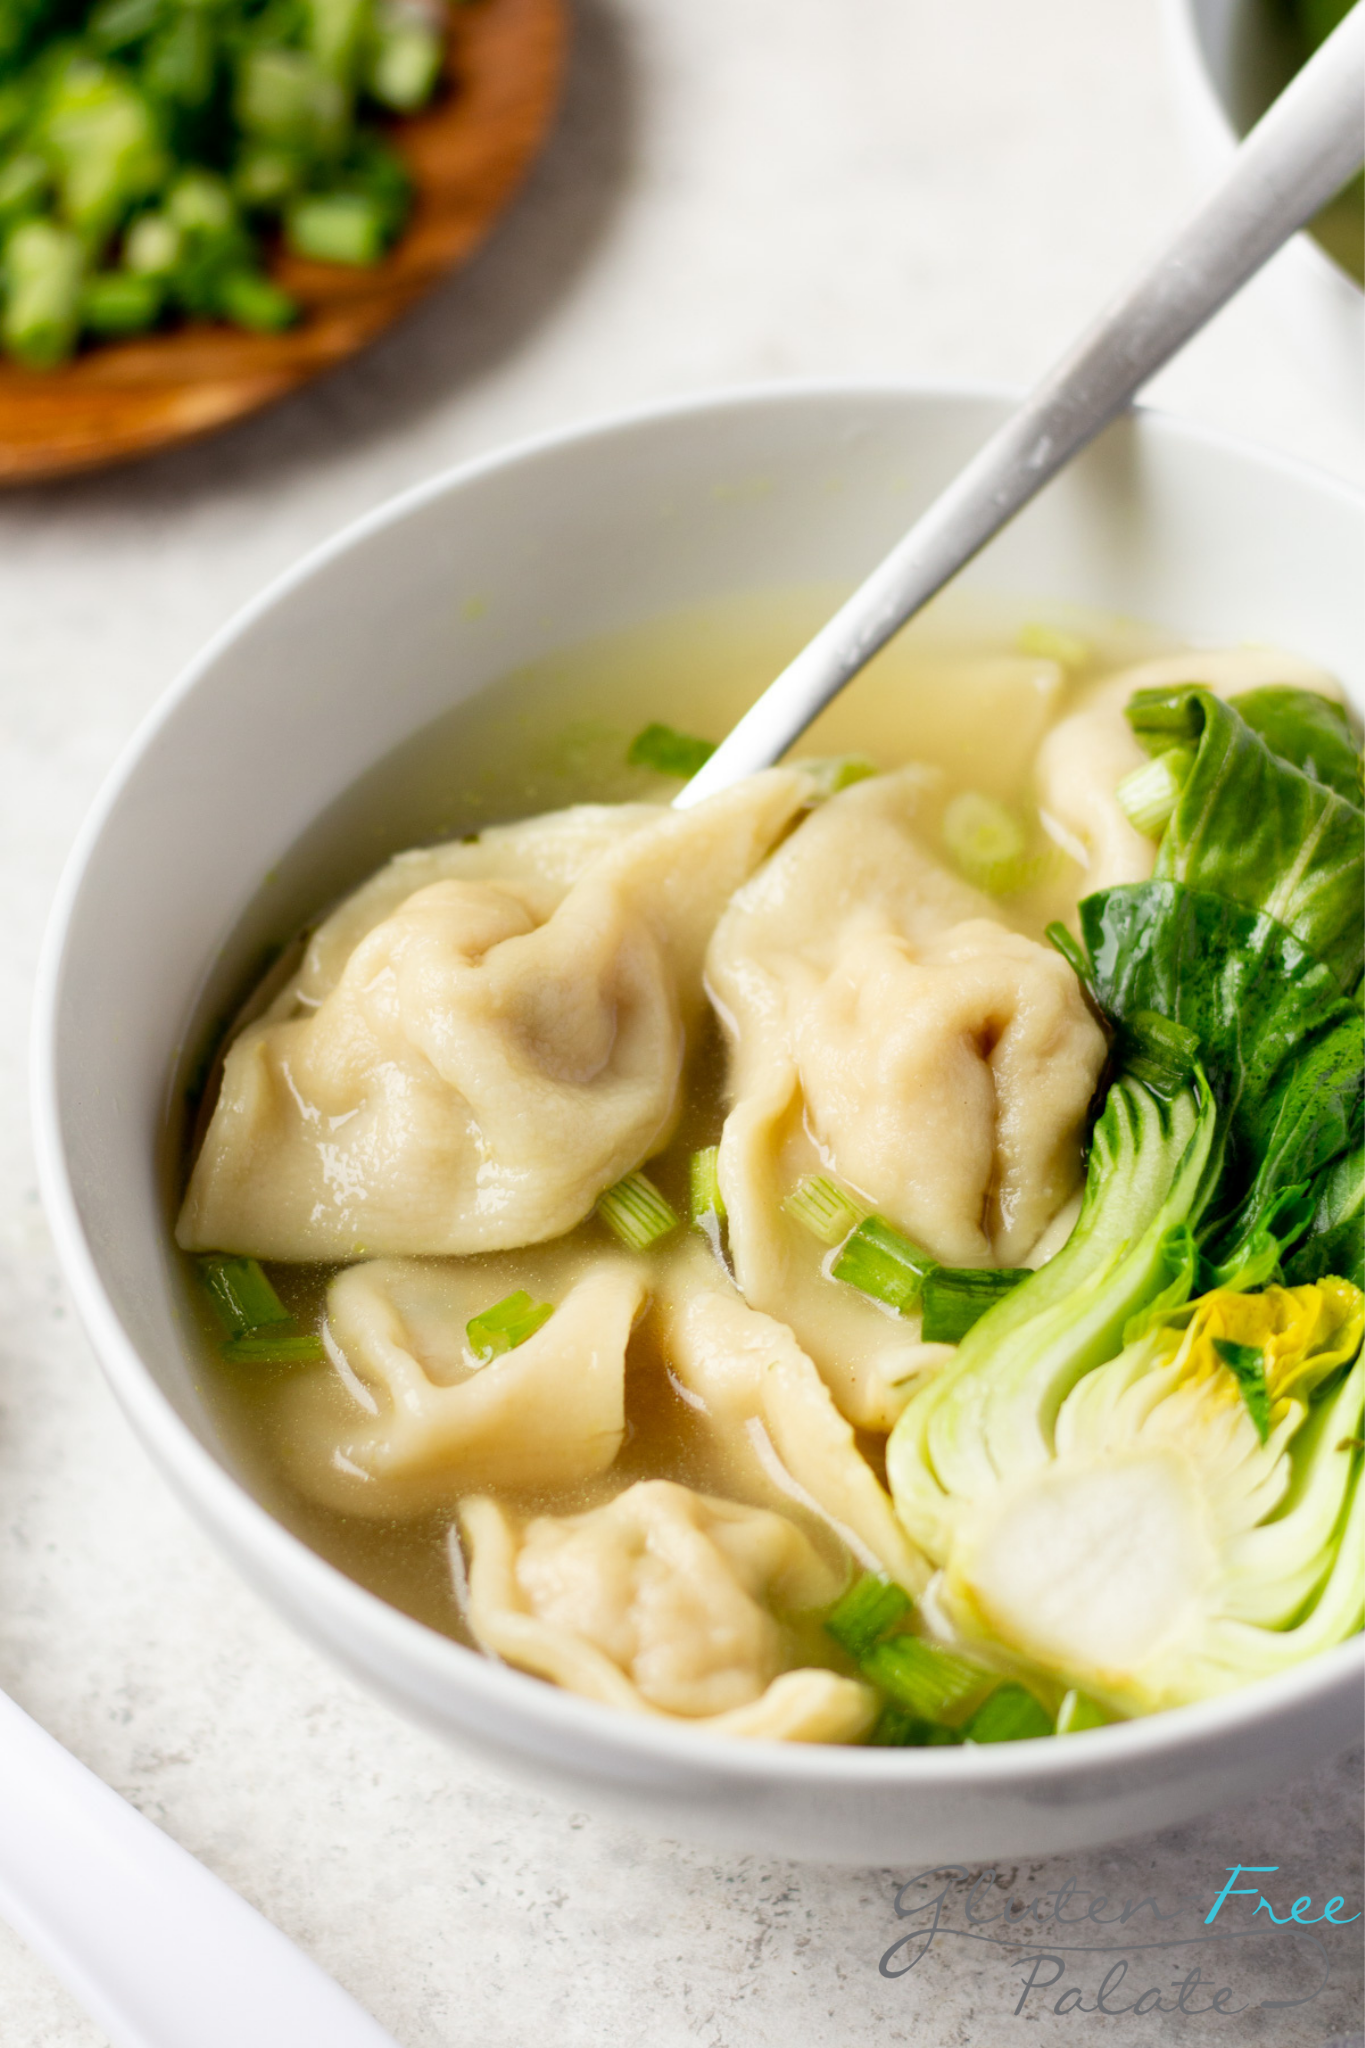 a bowl of wonton soup with baby Bok choi. A spoon is lifting a gluten-free wonton wrapper.